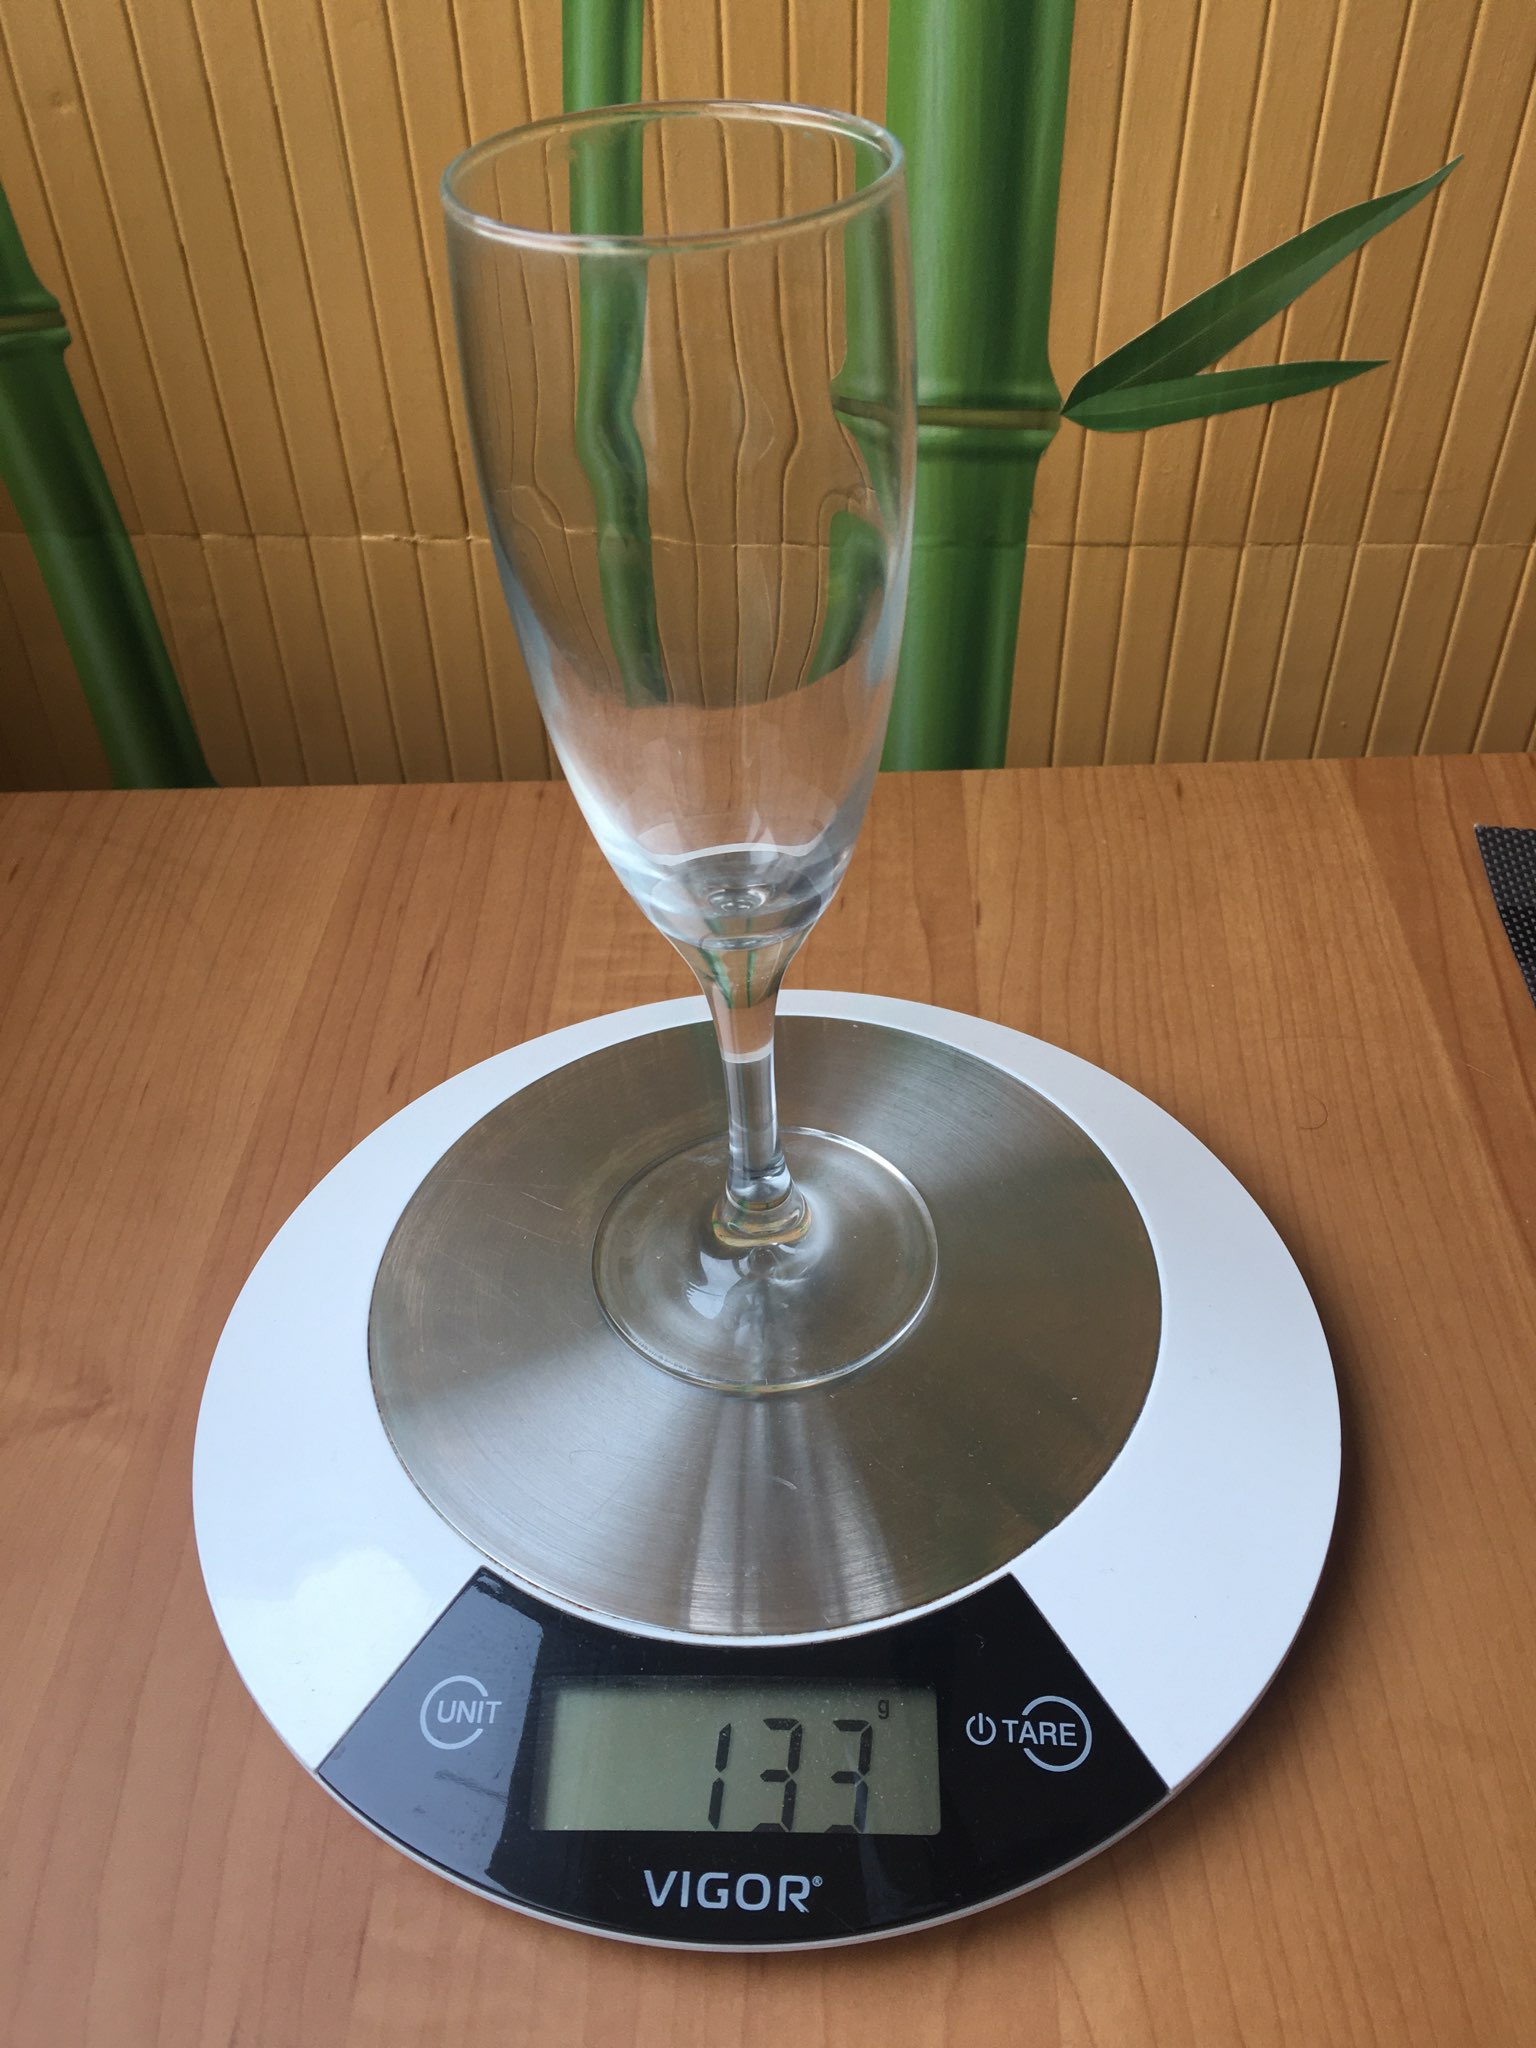 How much does a champagne glass weigh?